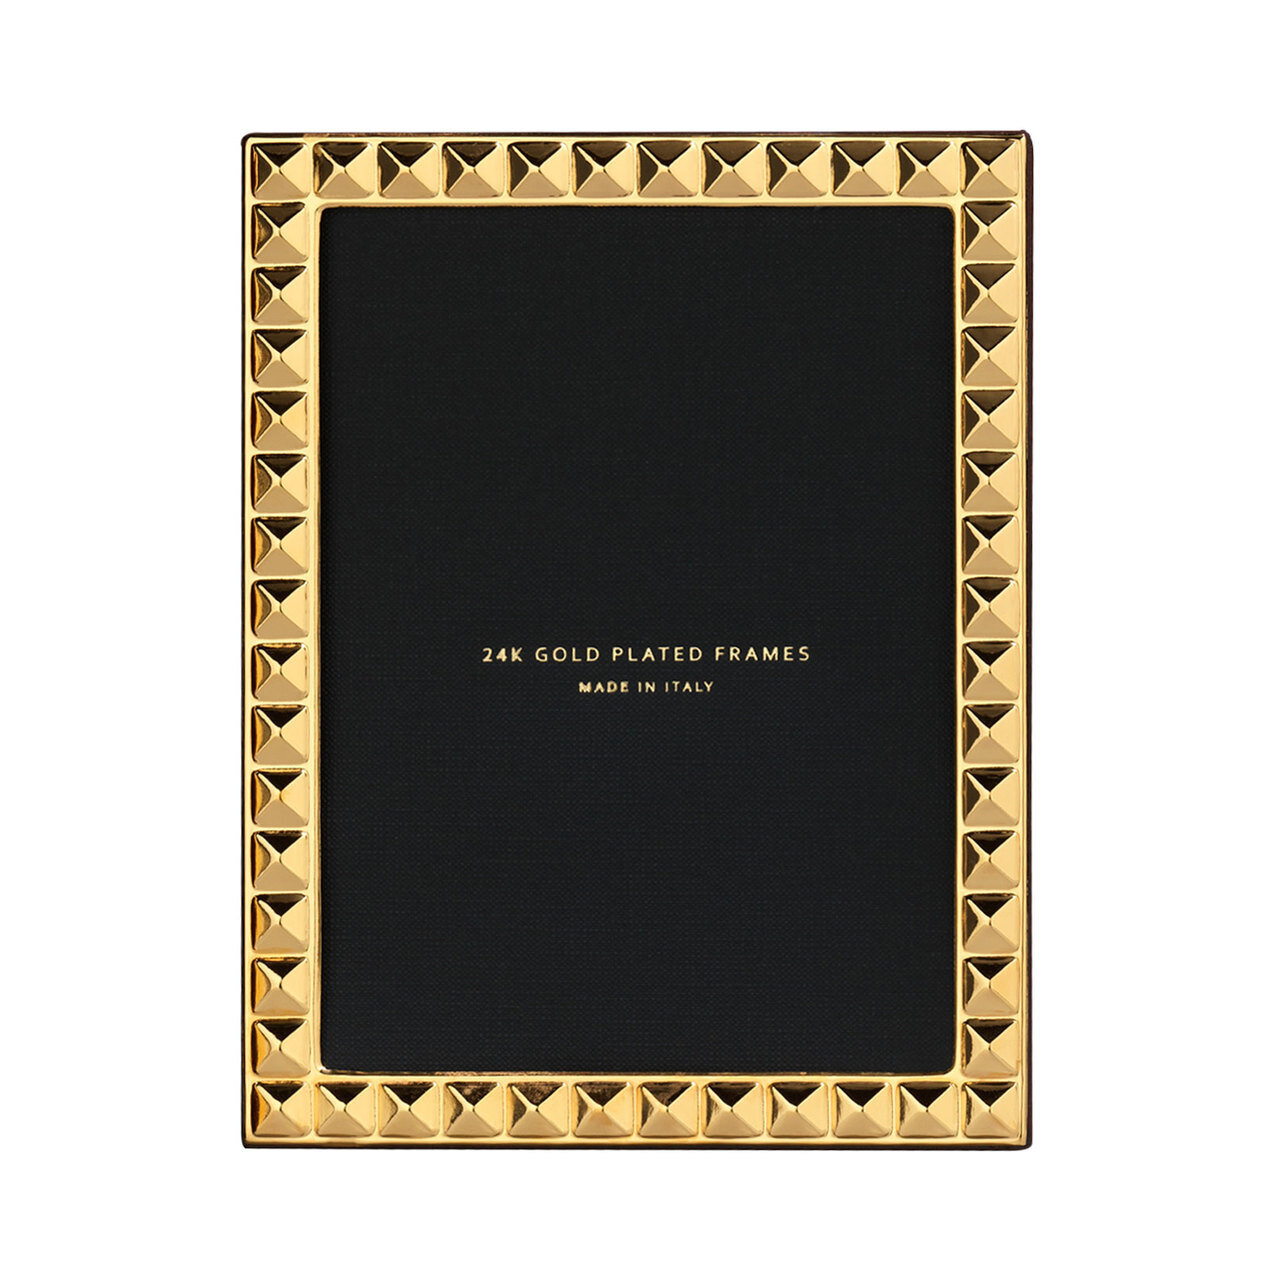 Cunill Diamonds 4 x 6 Inch Picture Frame - 24k Gold Plated 0.5 Microns